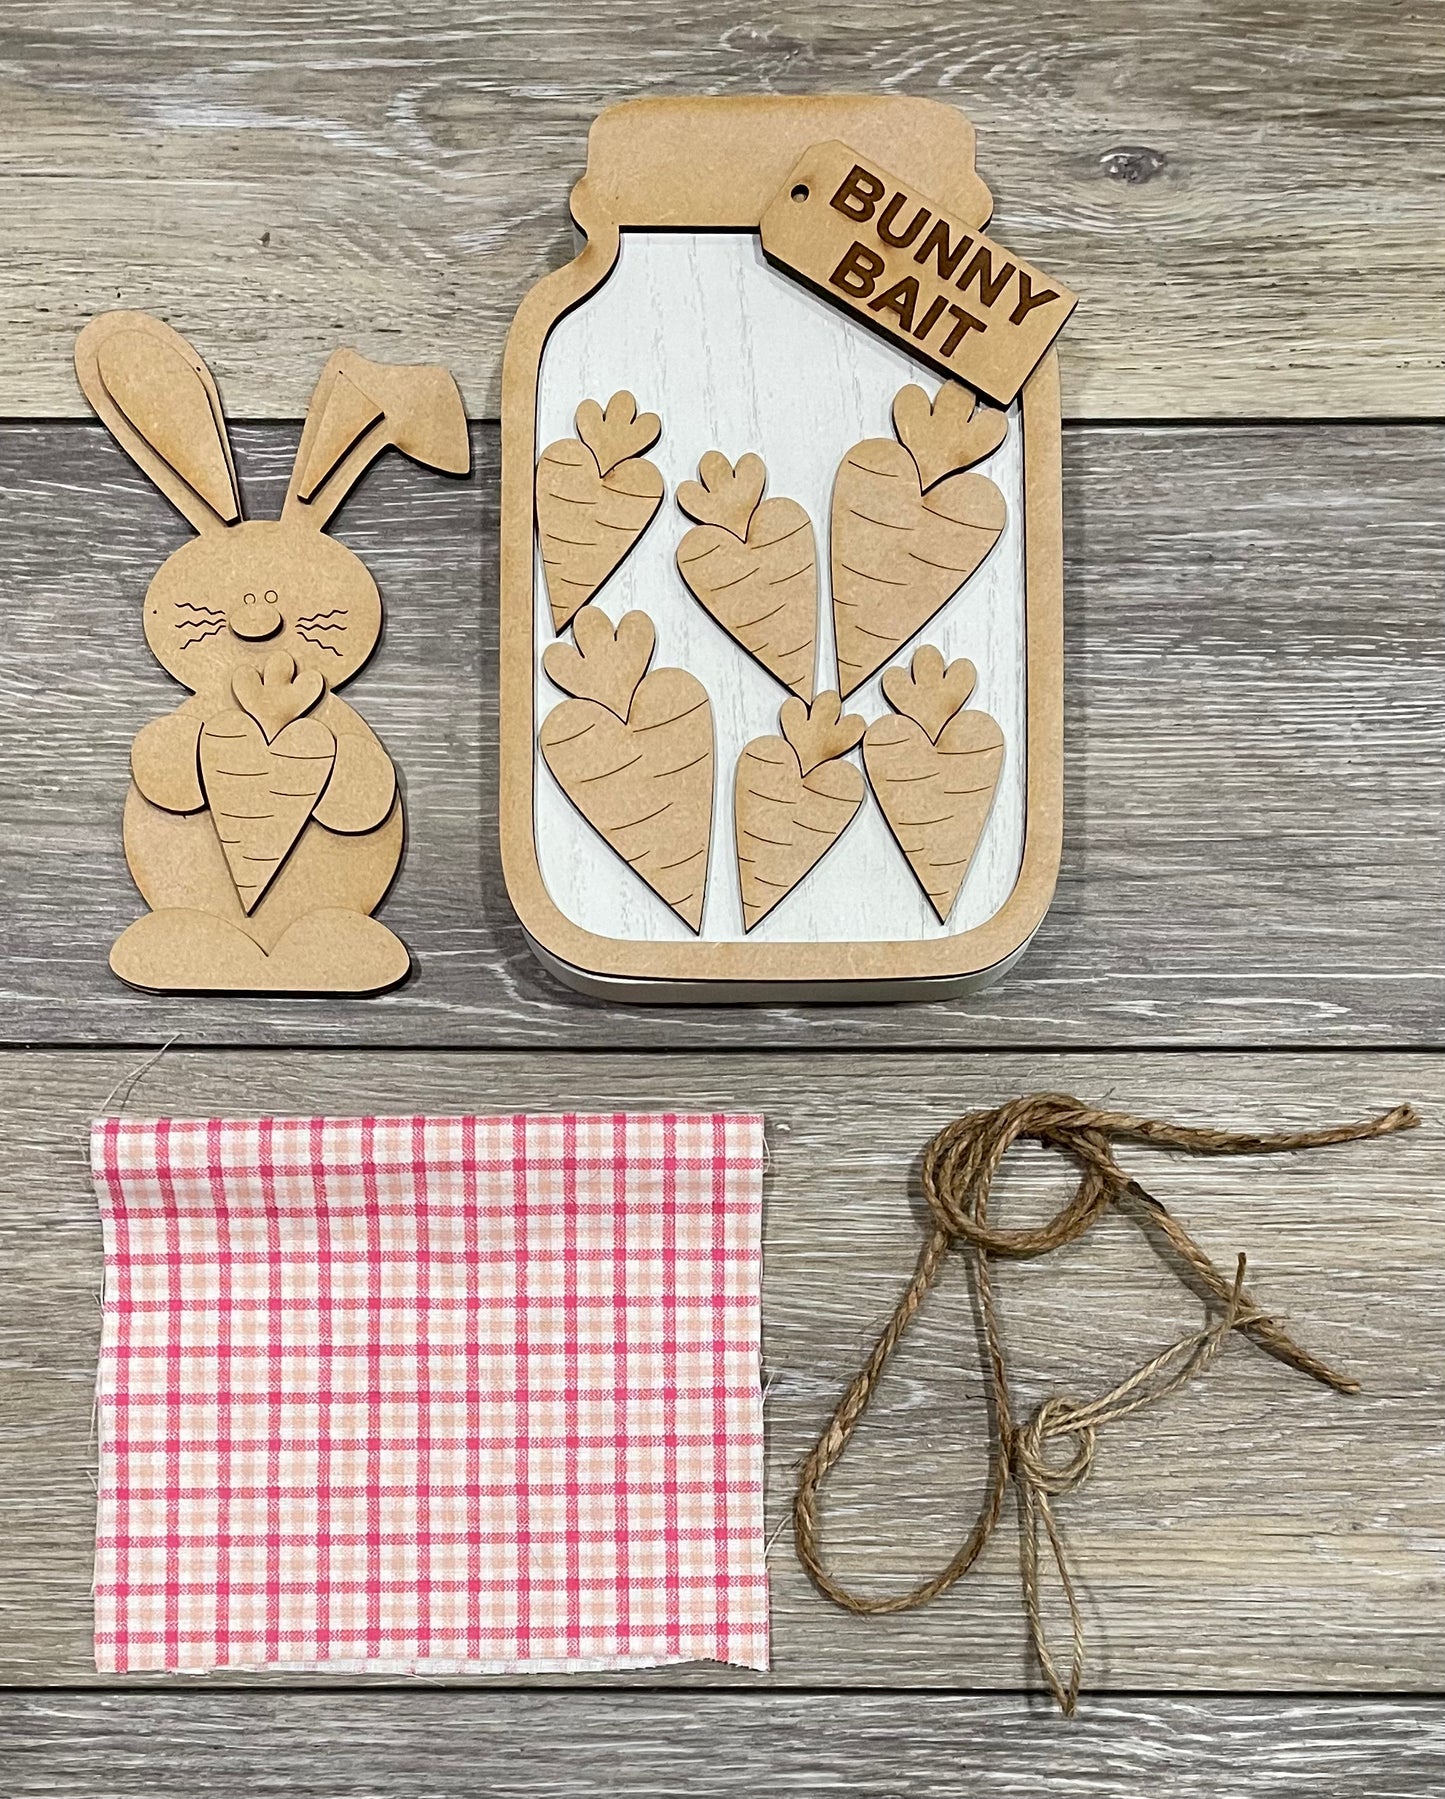 Bunny Bait Mason Jar Kit - Wood Cutouts unpainted ready for you to paint